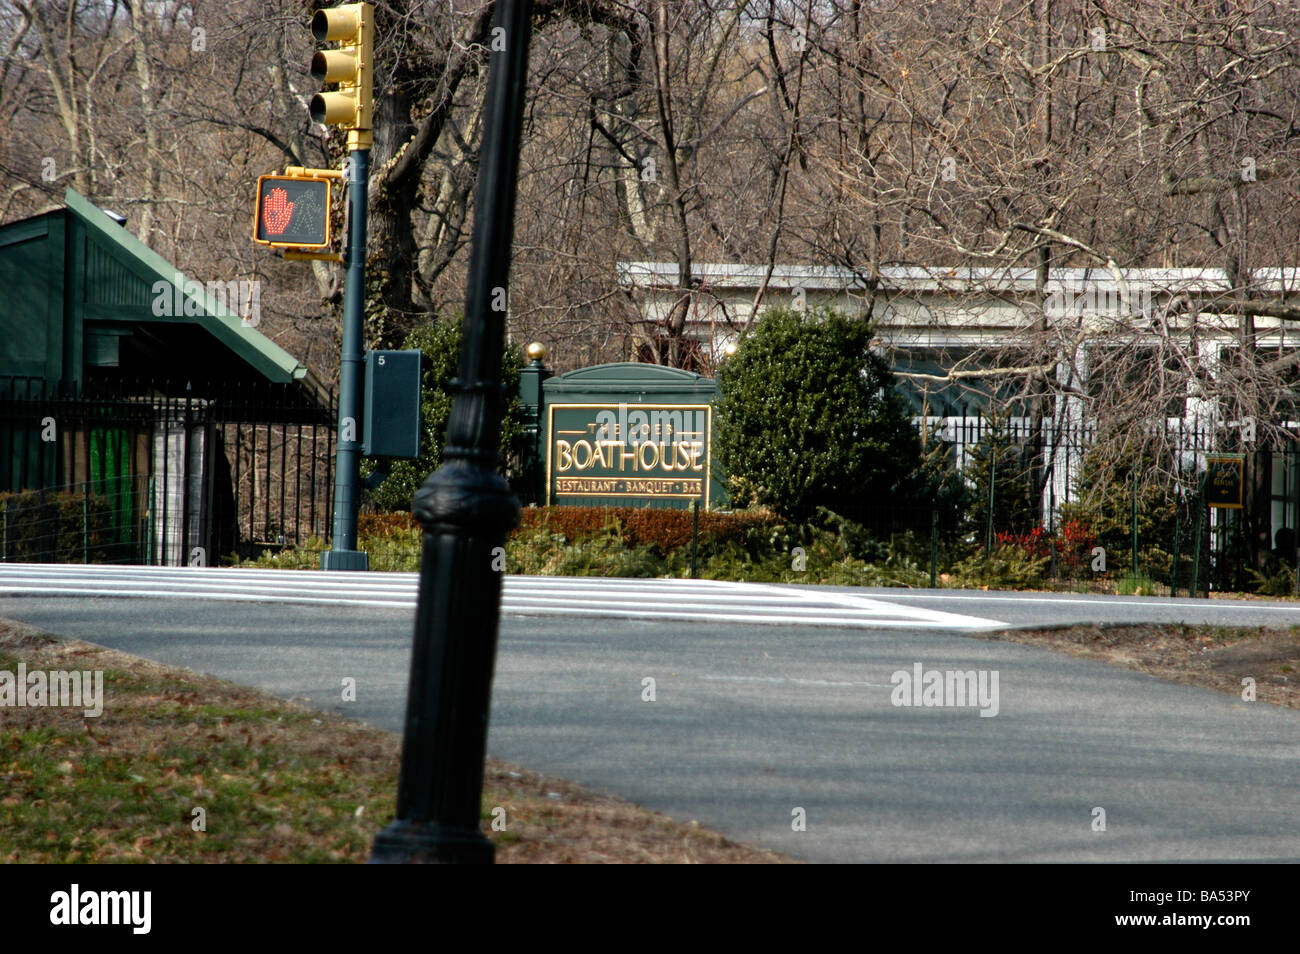 The sign and entrance to the Boathouse restaurant in Central Park Manhattan New York Stock Photo